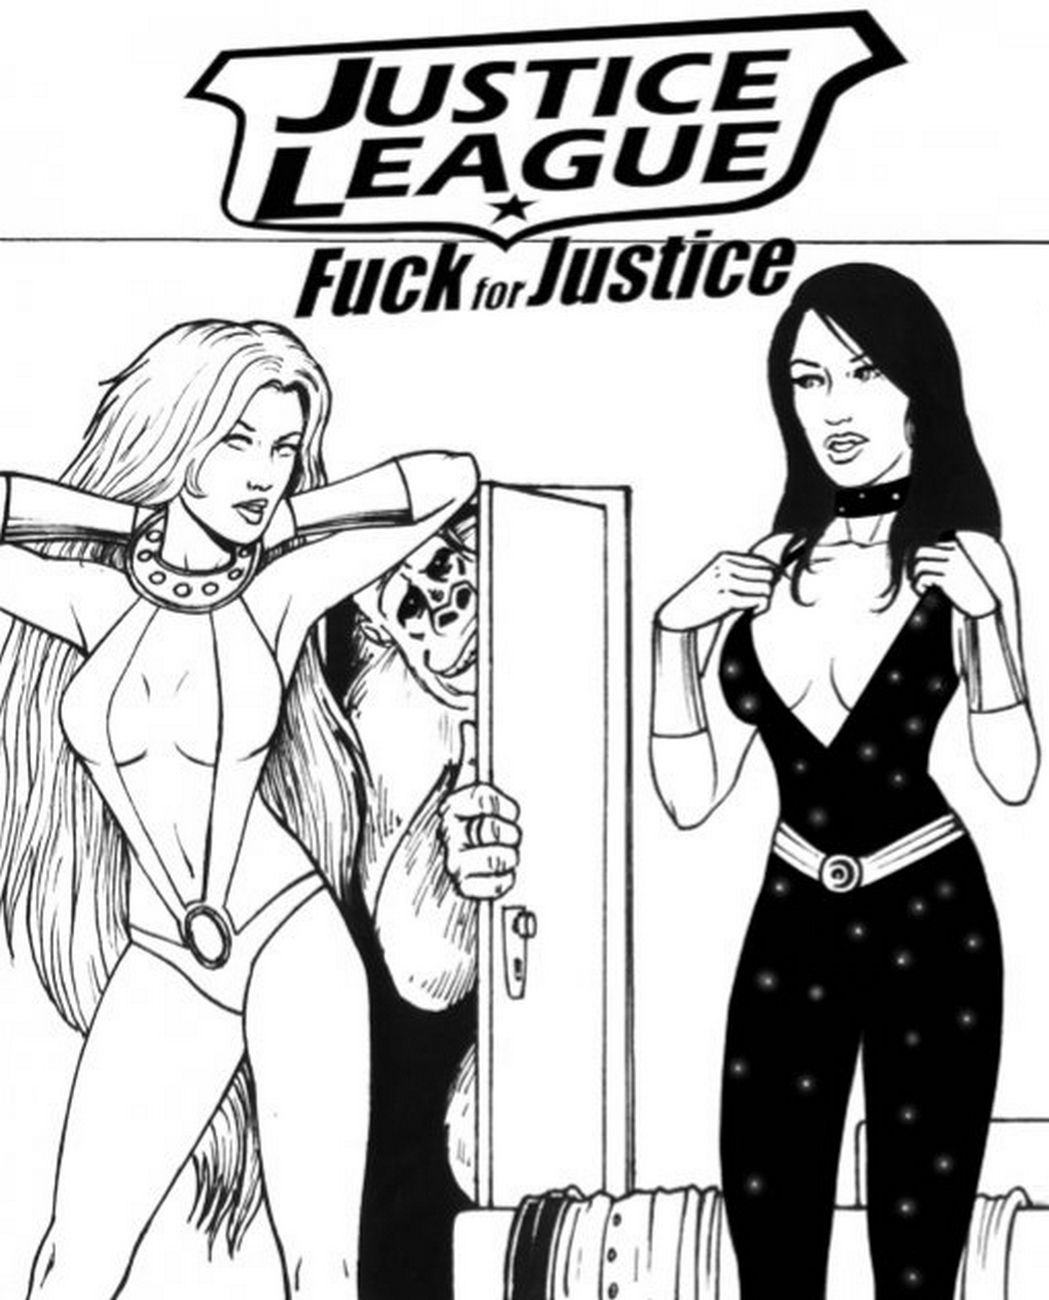 Justice League - Fuck For Justice page 1